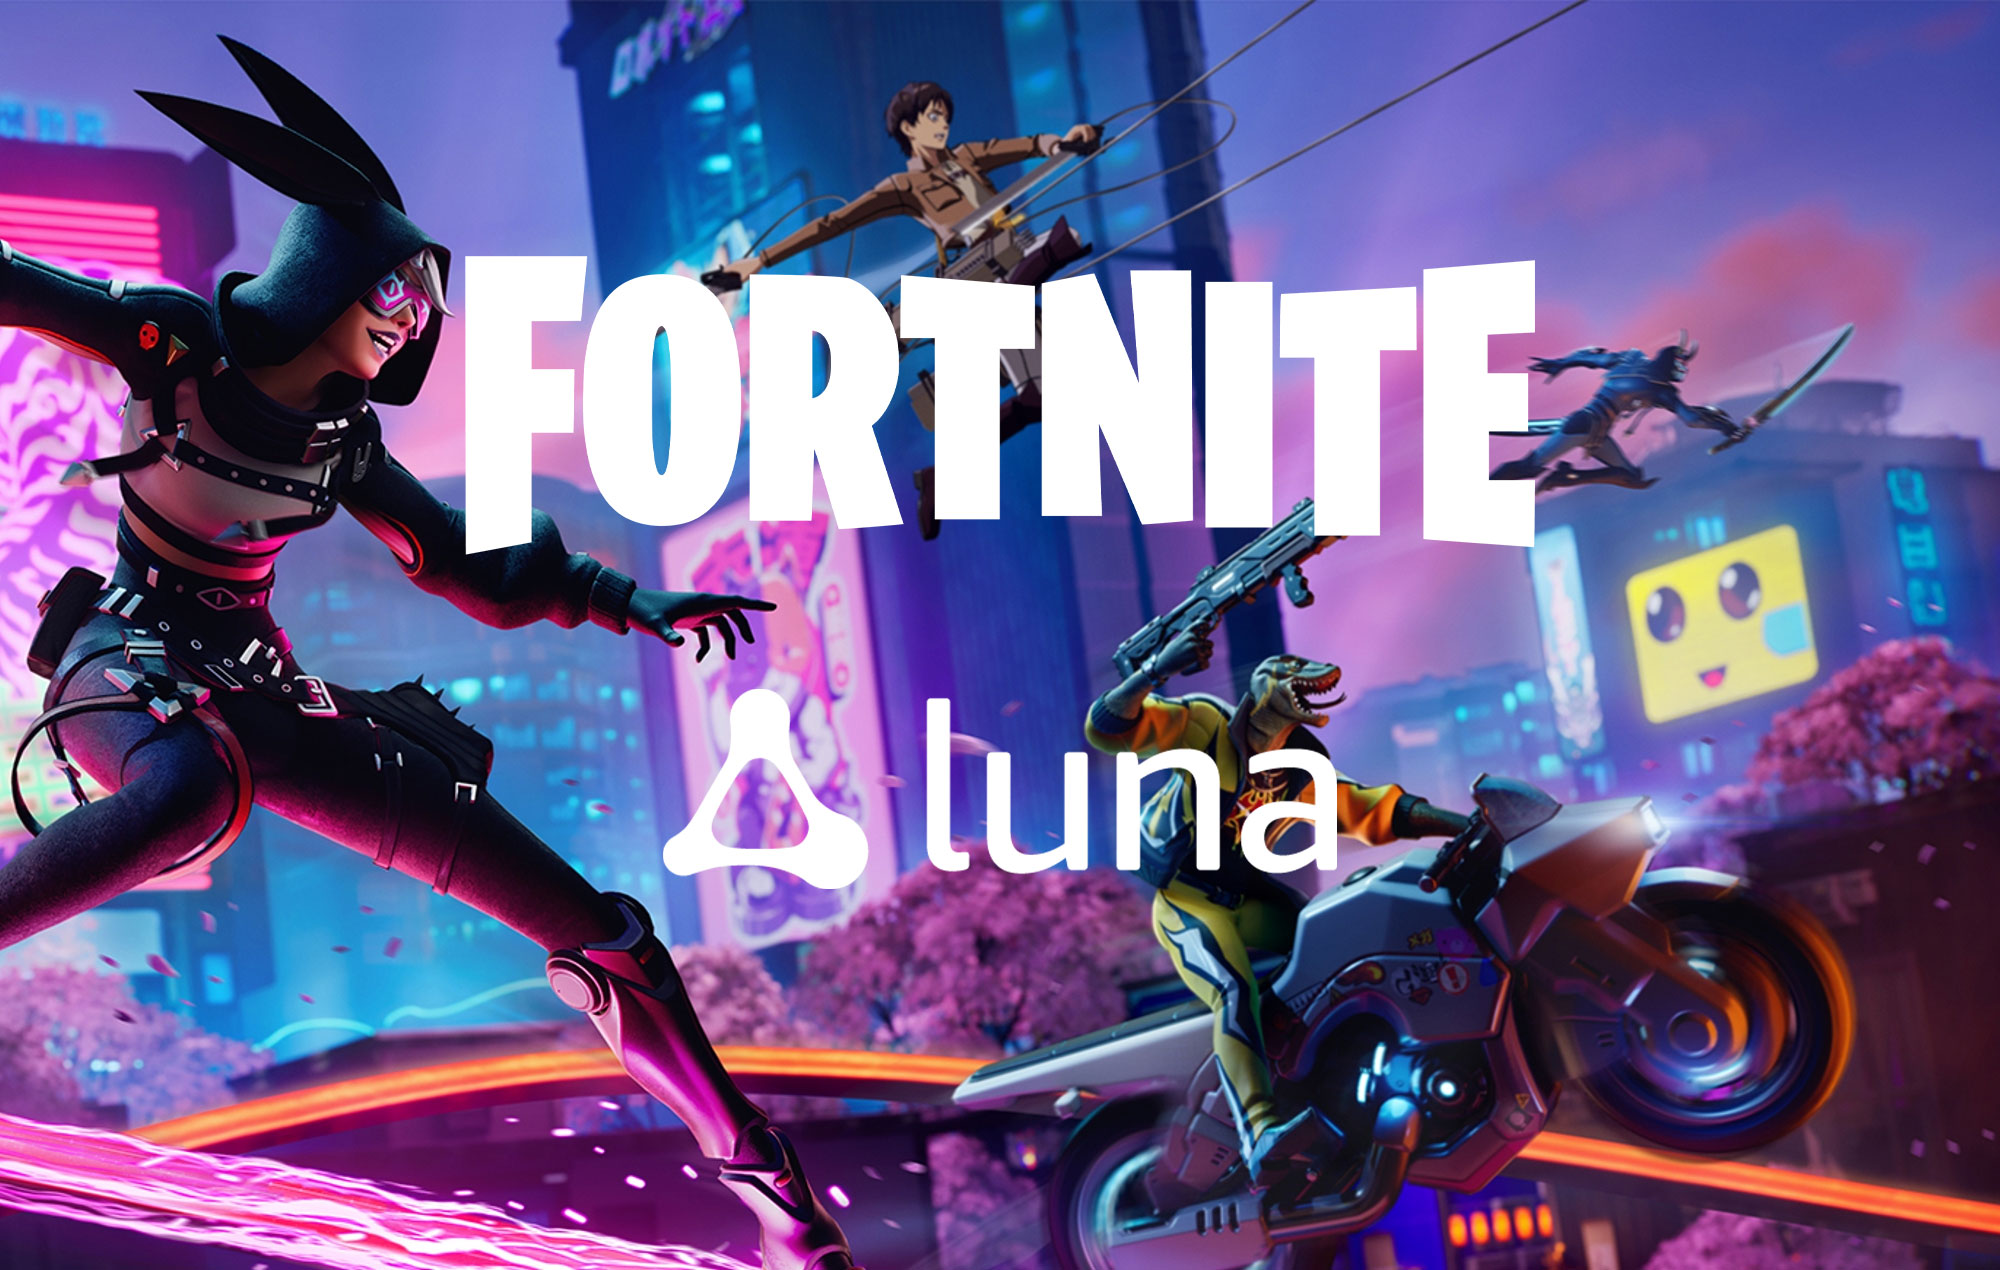 Fortnite' is now available on  Luna